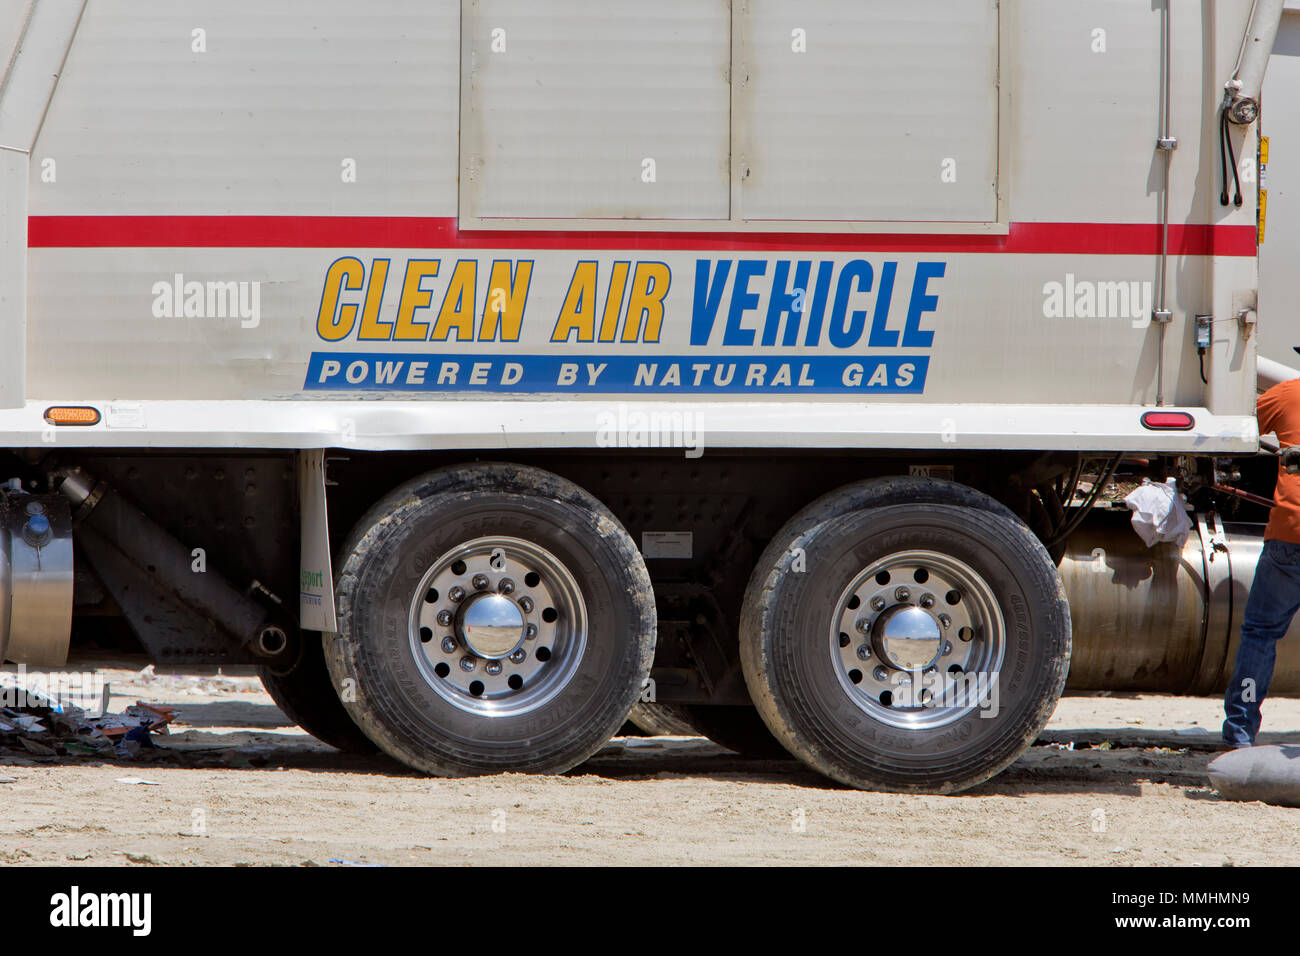 'Clean Air Vehicle' - 'Powered by Natural Gas', truck hauling garbage to local Sanitary landfill. Stock Photo